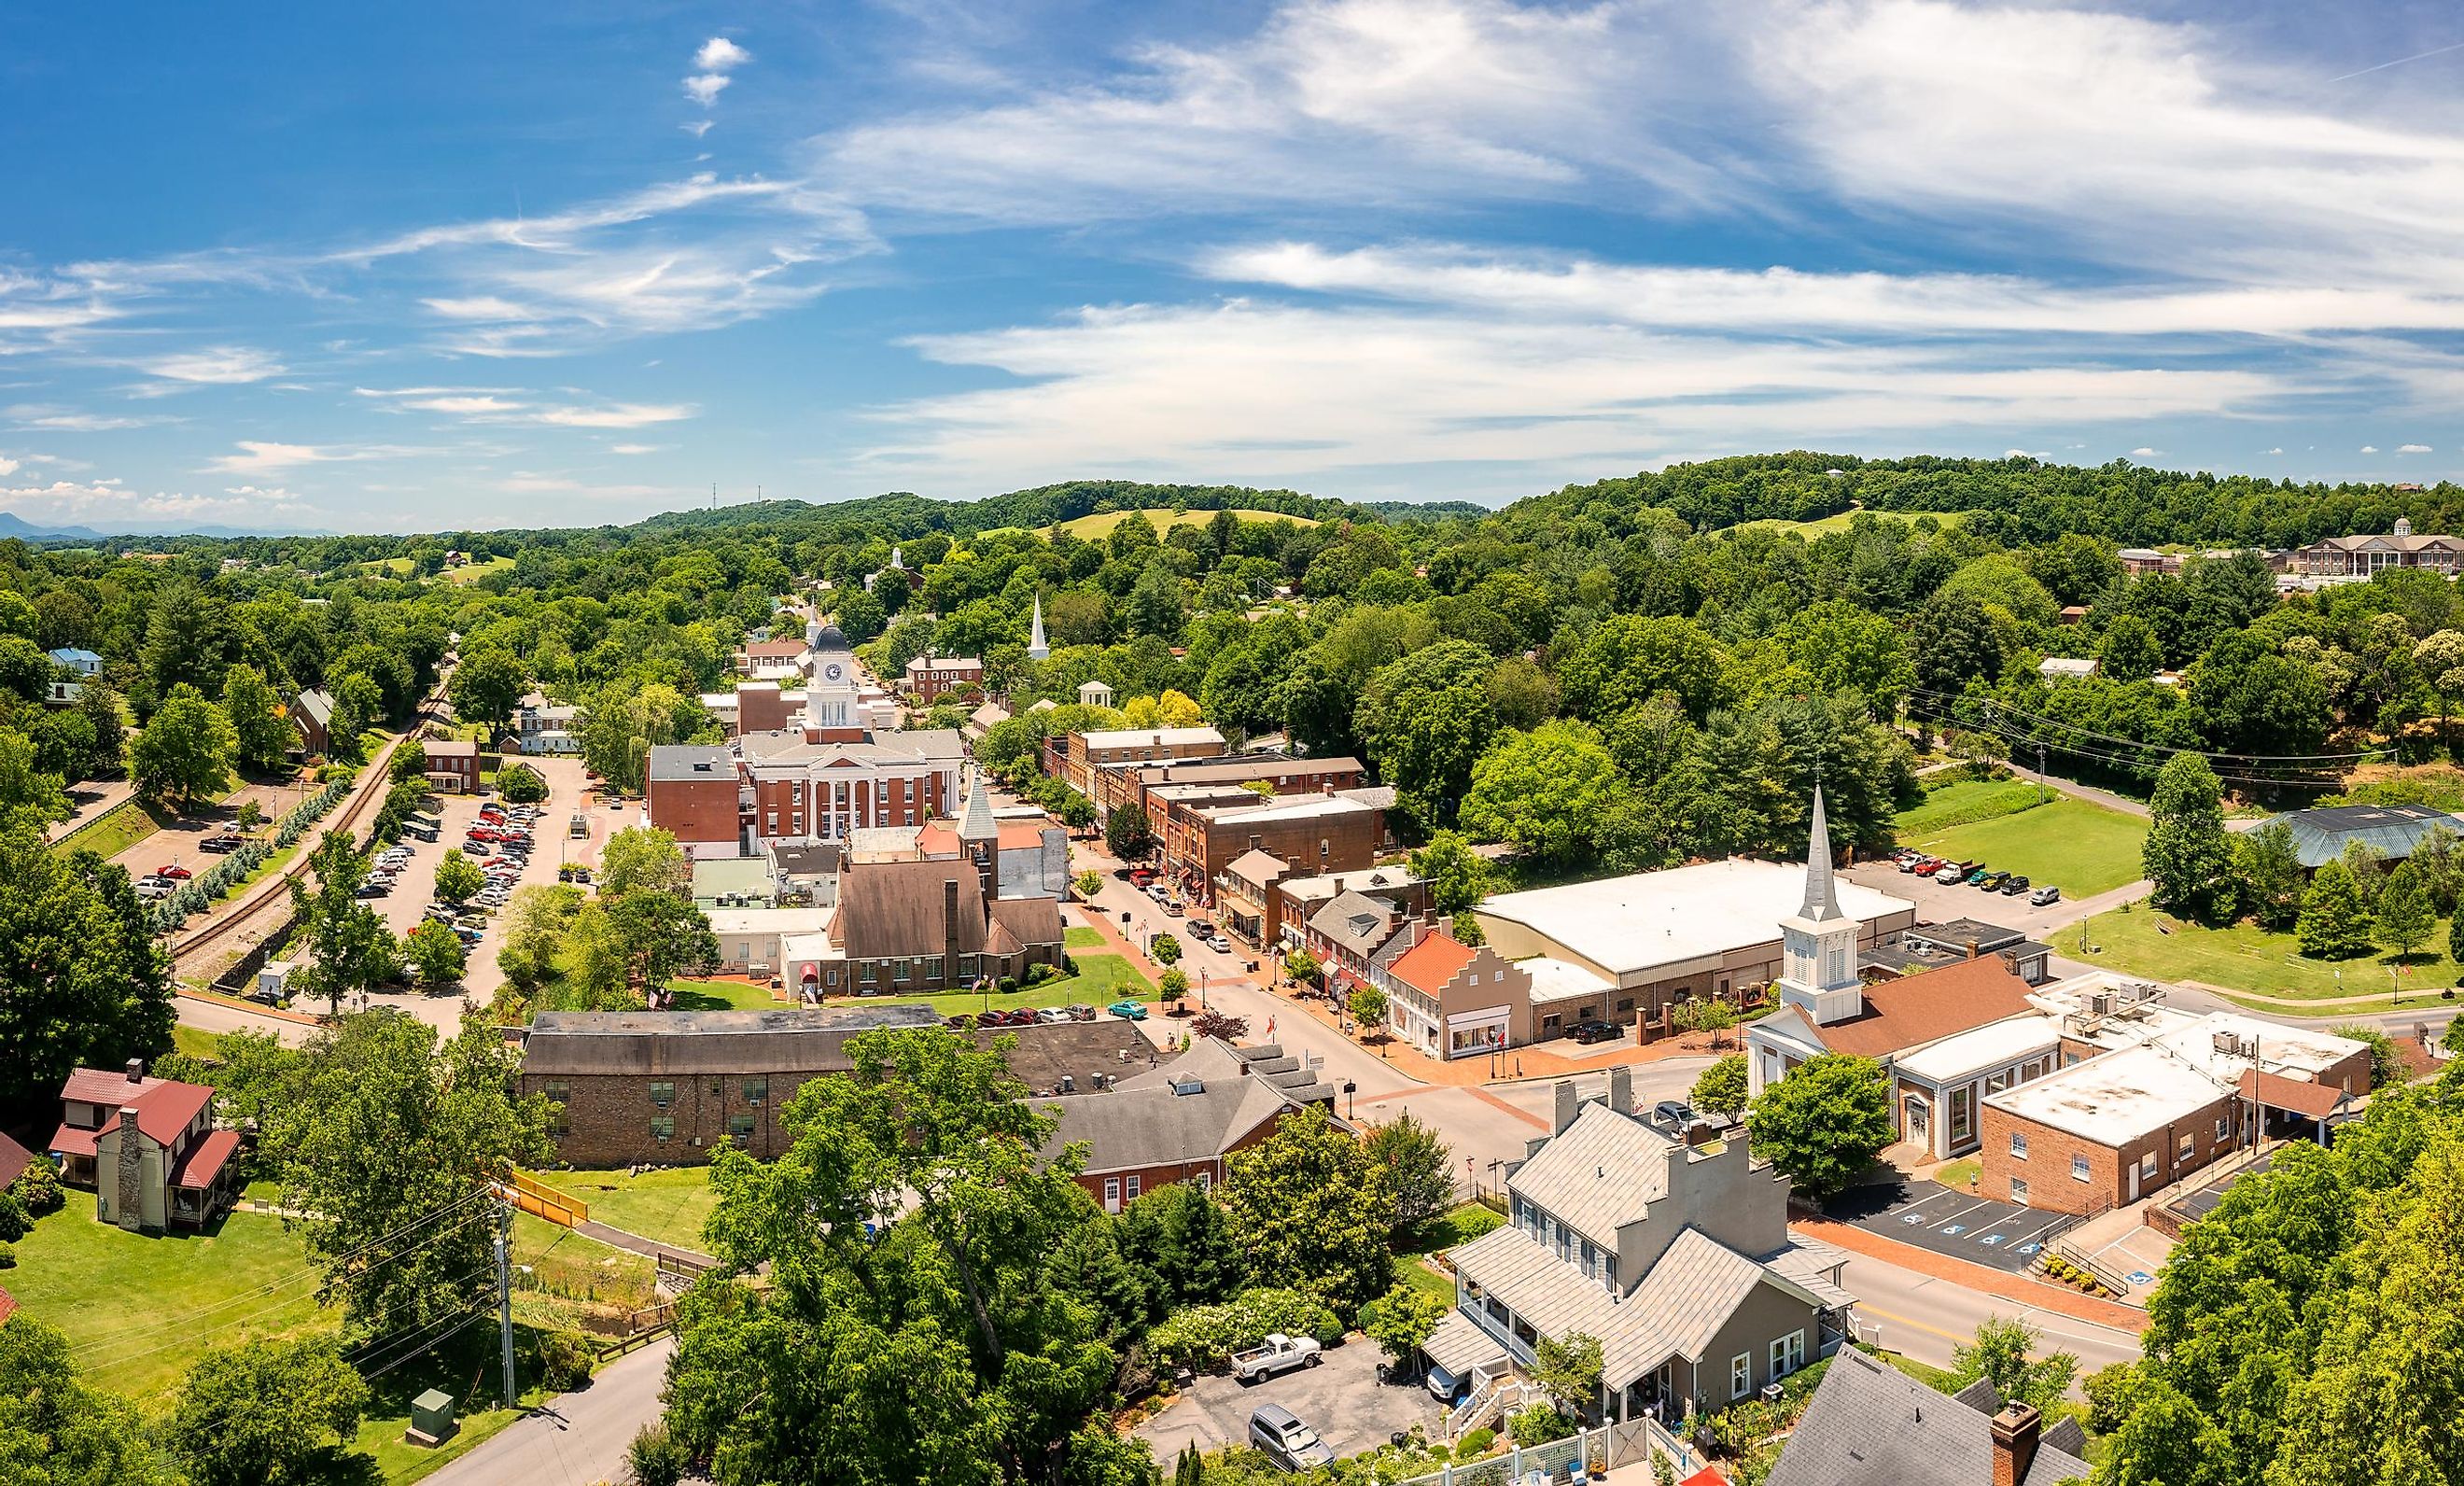 Aerial view of Tennessee's oldest town, Jonesborough